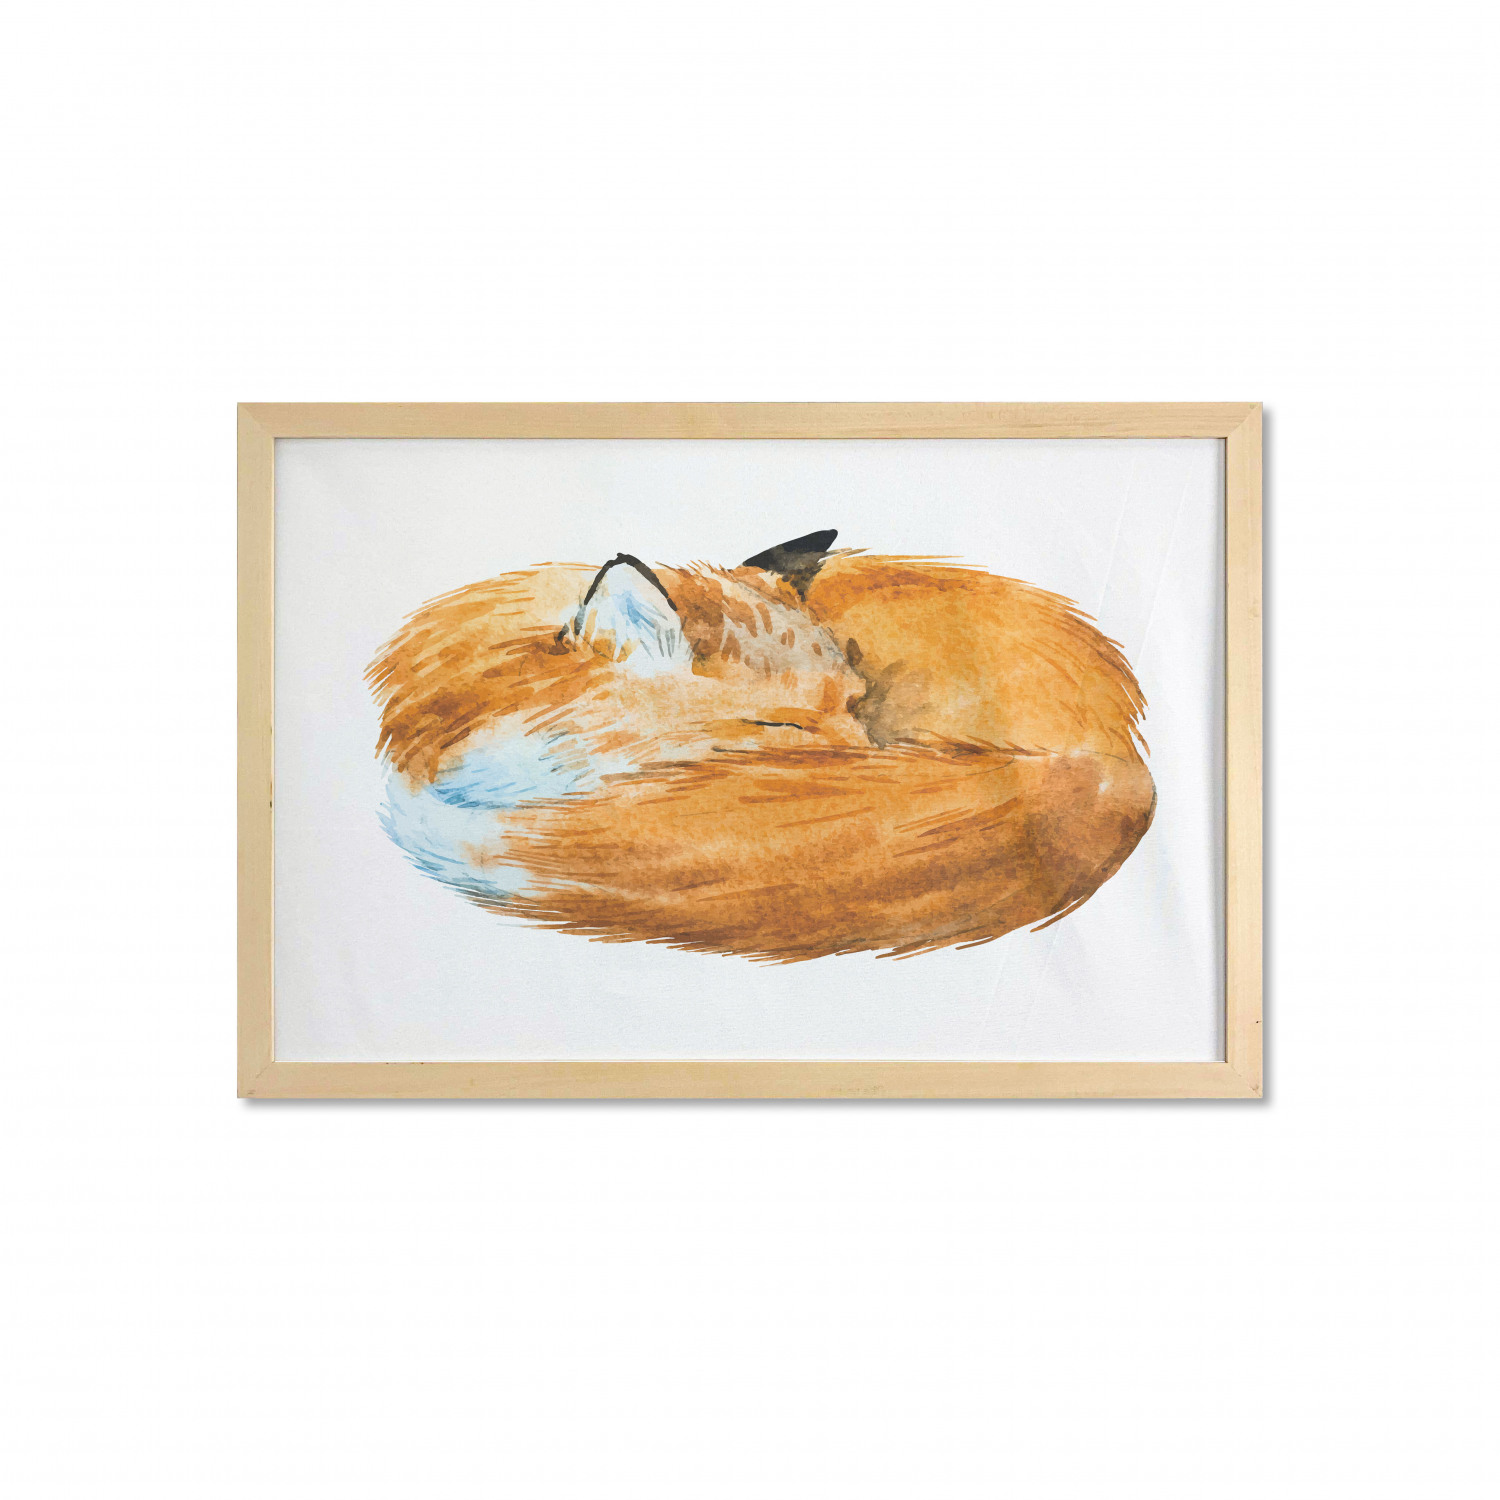 Animal Wall Art with Frame, Fox Sleeping Funny Creature in Watercolor Art Design, Printed Fabric Poster for Bathroom Living Room, 35" x 23", Apricot and White, by Ambesonne - image 1 of 2